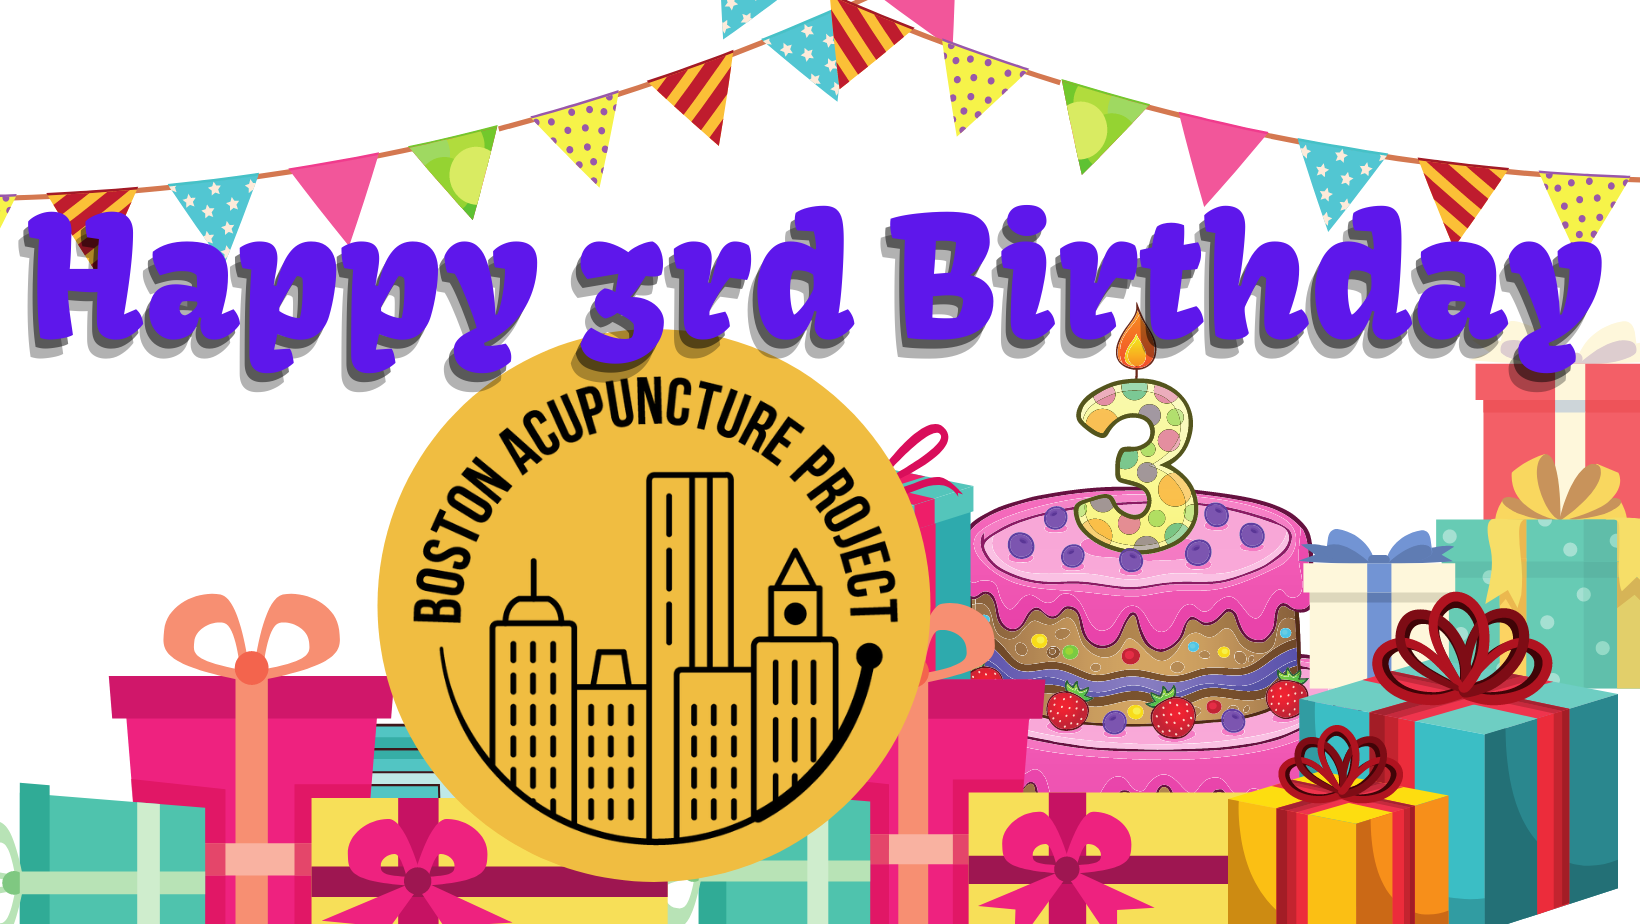 Happy Third Birthday Boston Acupuncture Project image of cartoon cake and gifts.